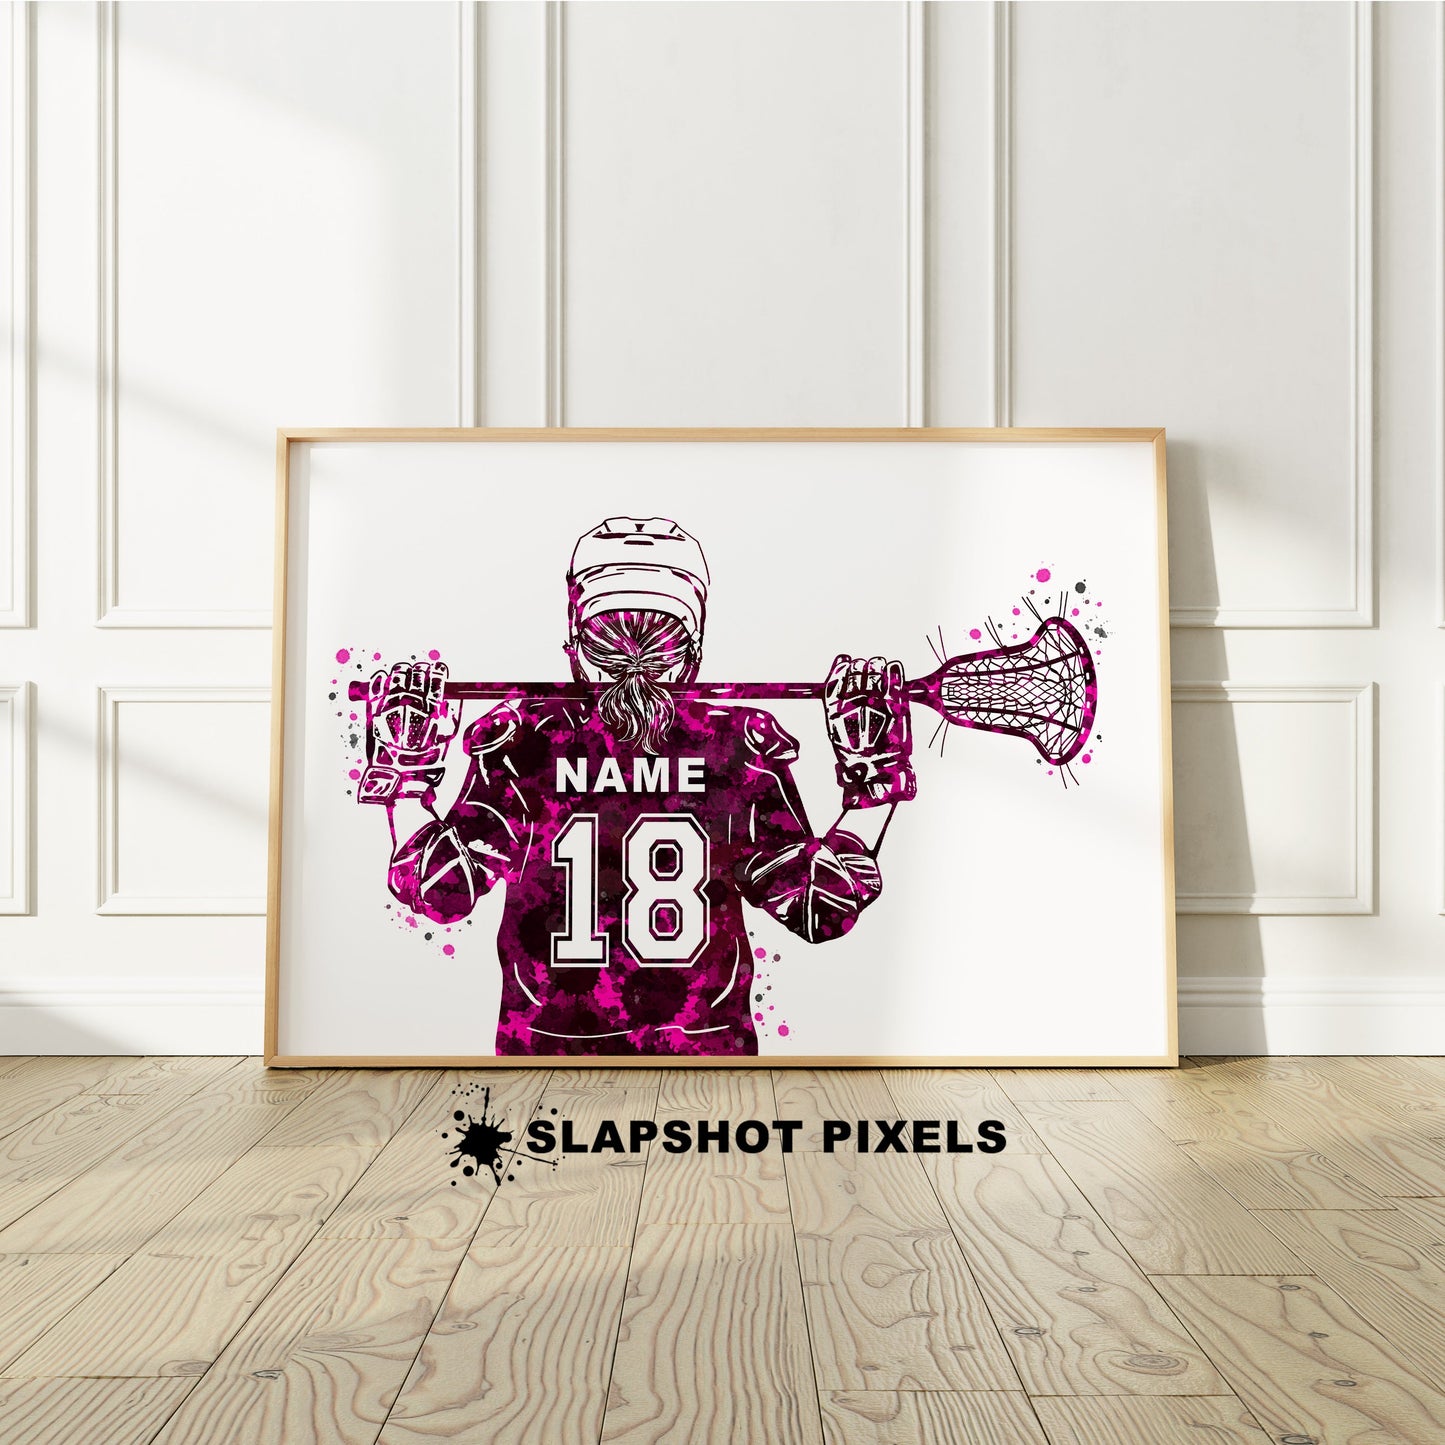 Personalized girl lacrosse poster showing back of a girl lacrosse player with custom name and number on the lacrosse jersey. Designed in watercolor splatters. Perfect lacrosse gifts for girls, lacrosse goalie prints, lacrosse team gifts, lacrosse coach gift, lacrosse wall art décor in a lacrosse bedroom and birthday gifts for lacrosse players.